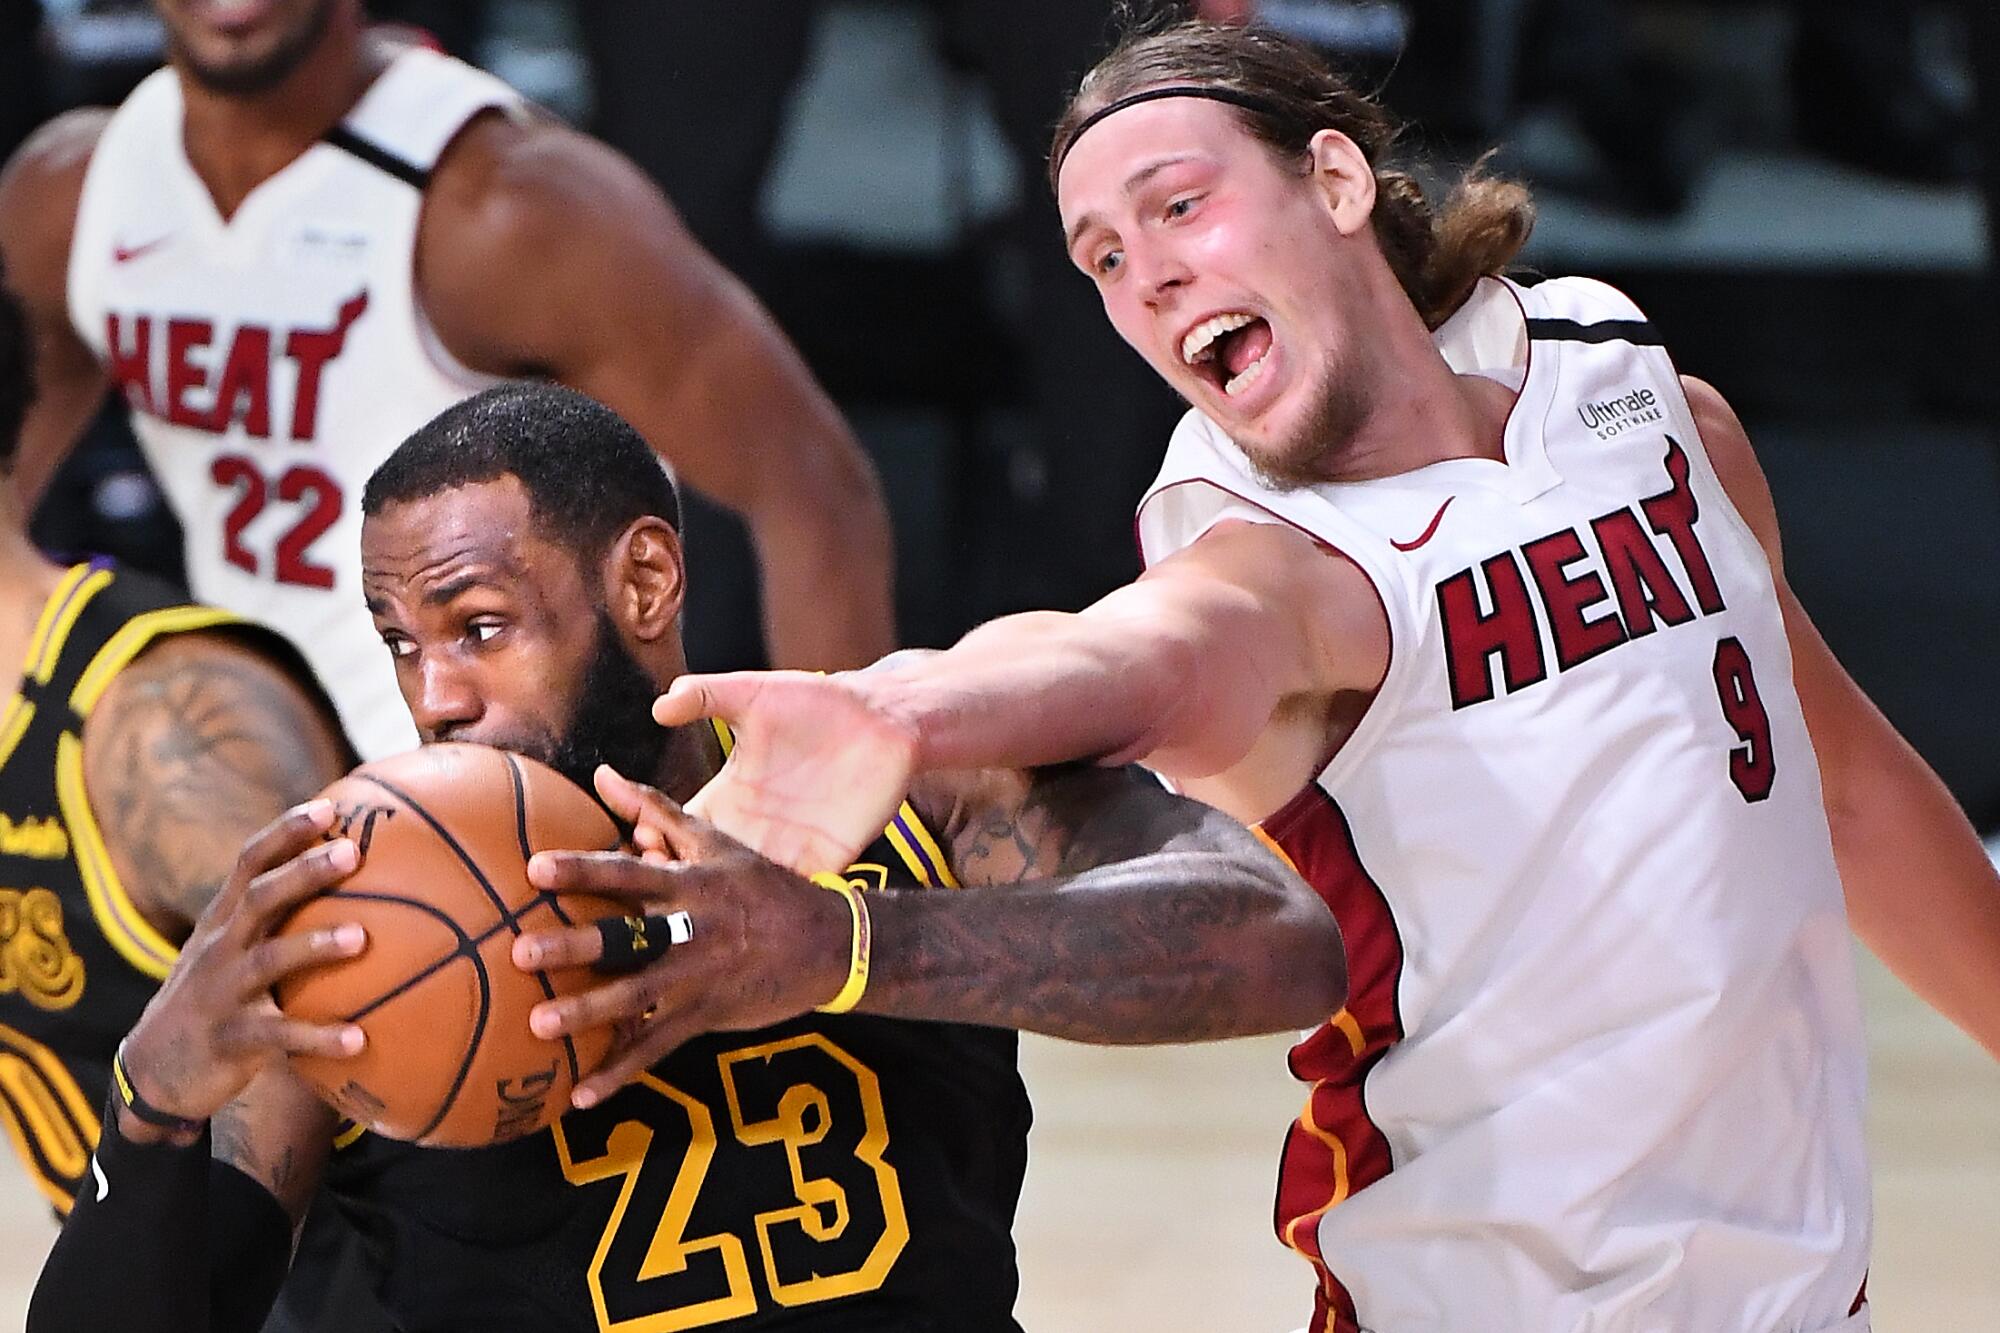 Lakers star LeBron James grabs a rebound in front of Miami's Kelly Olynyk during the second quarter of Game 2.